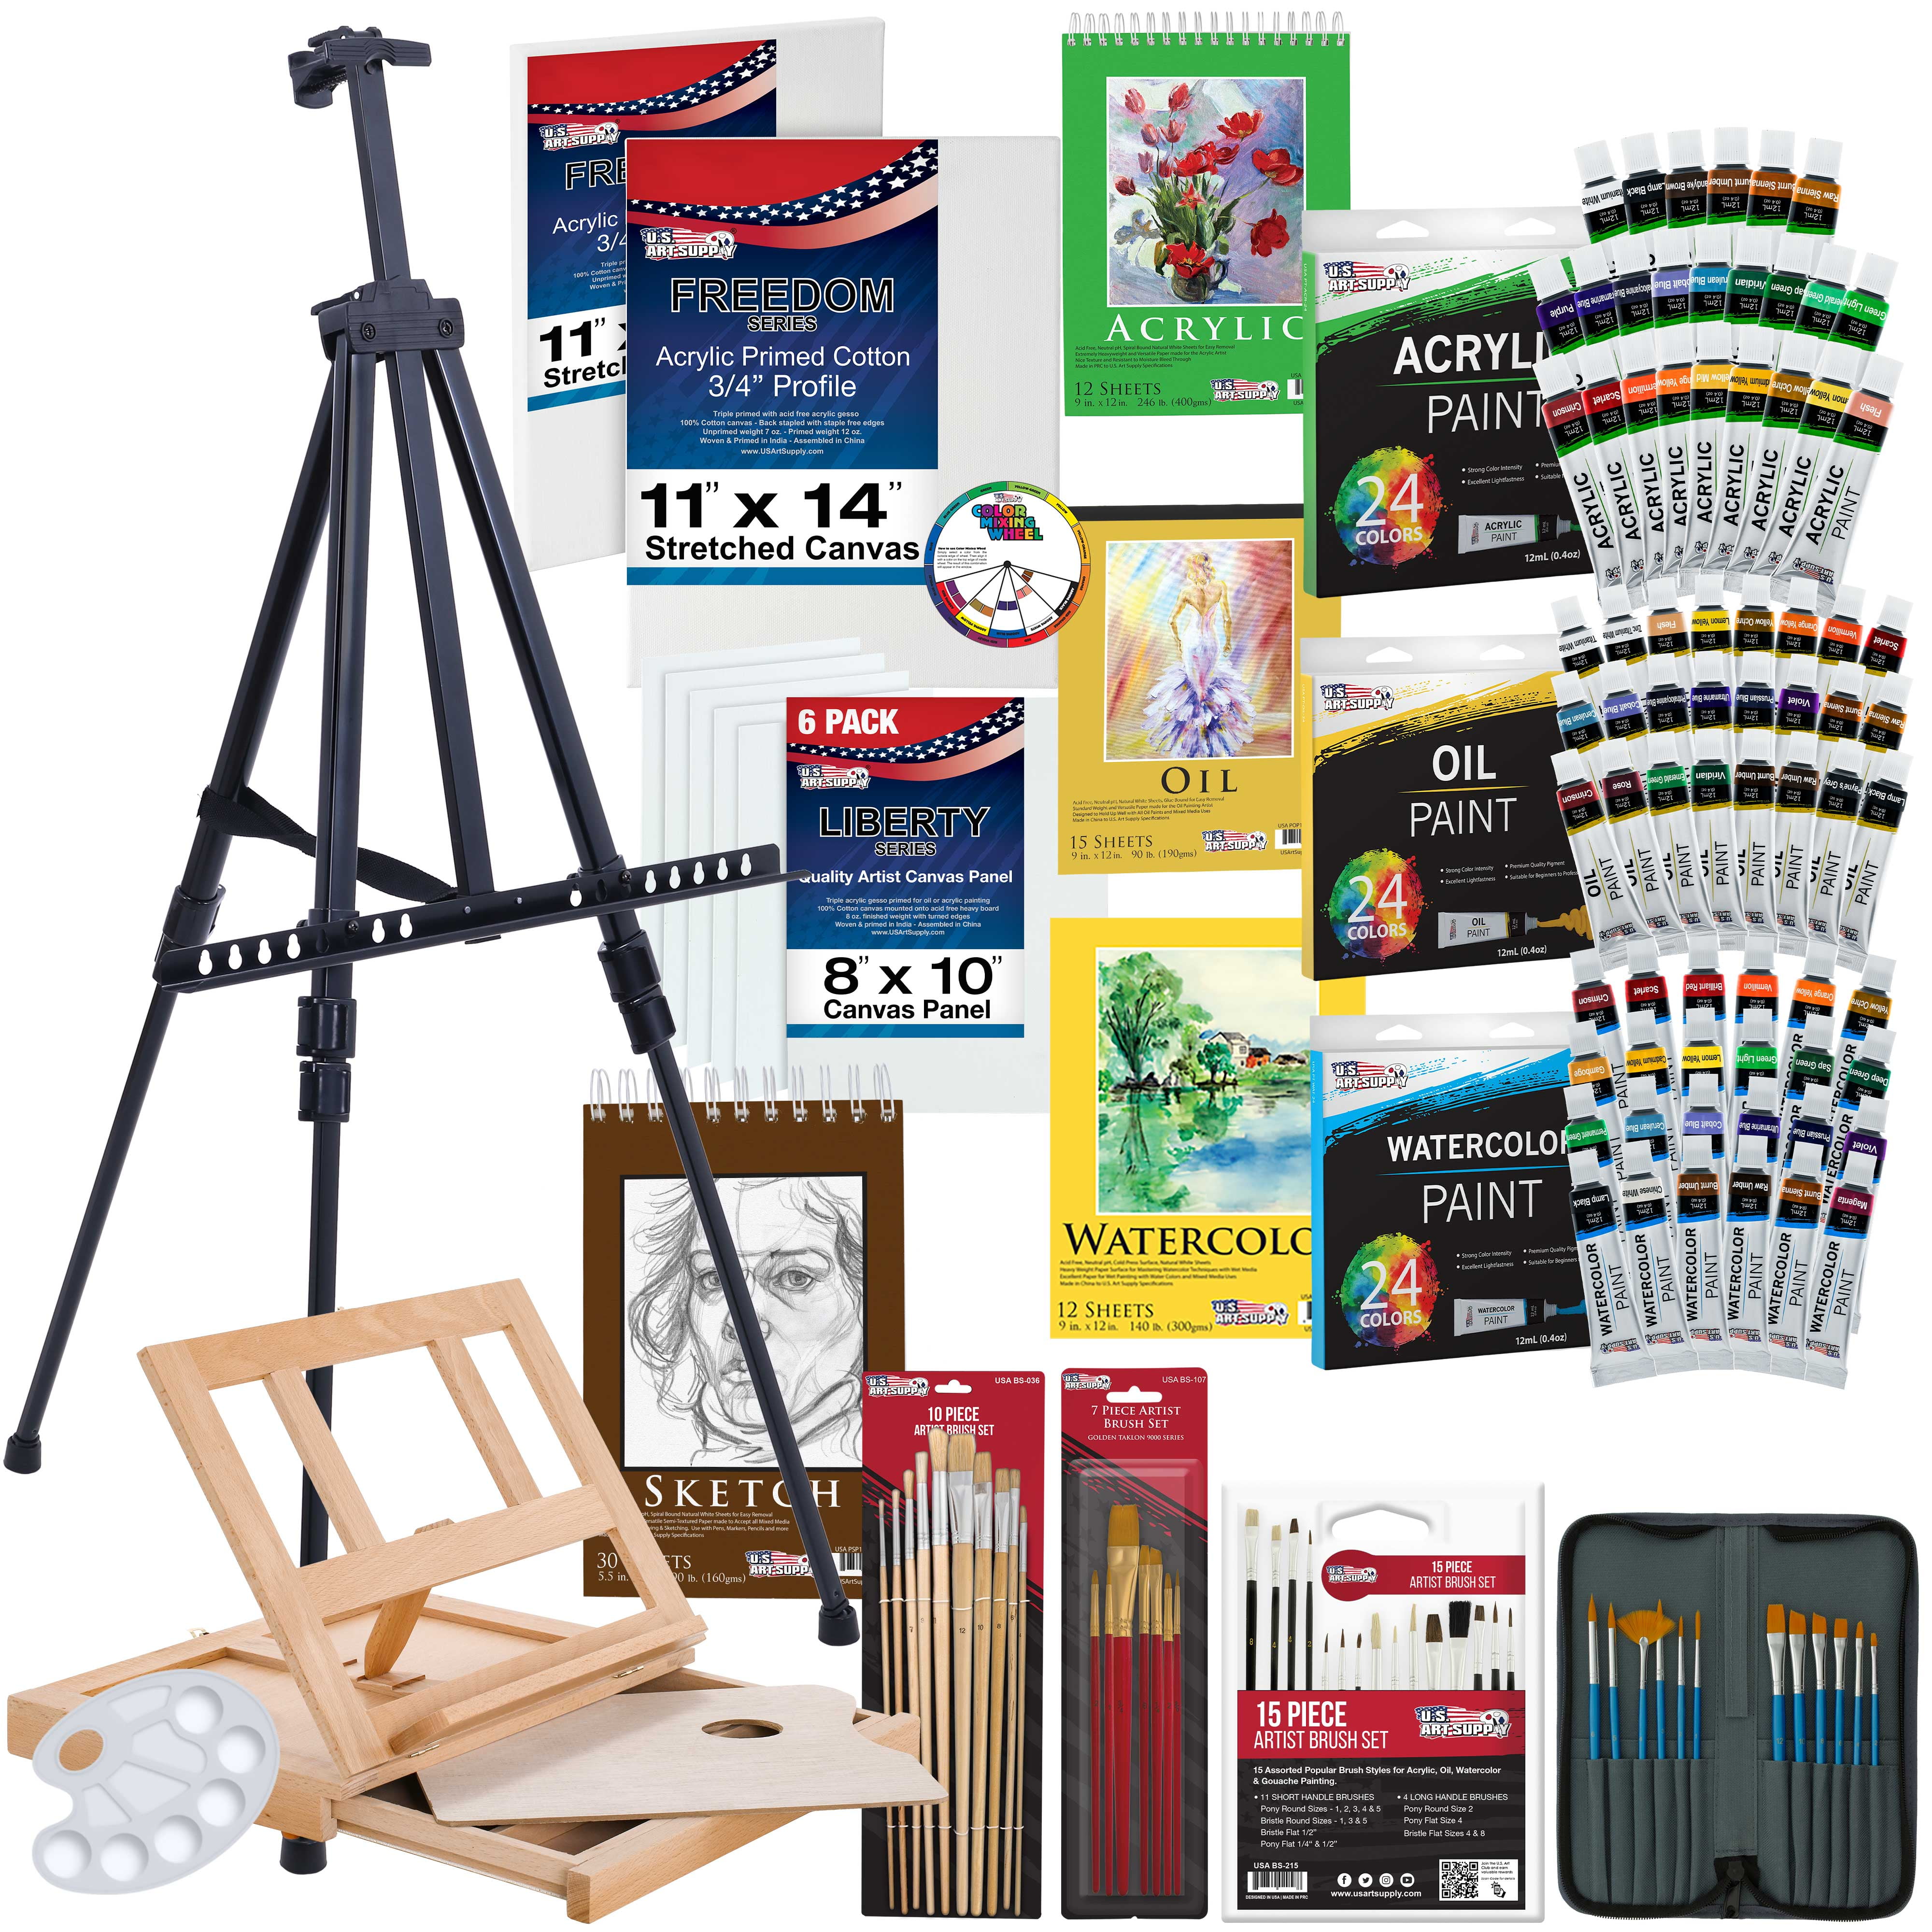 Art Set 85 Piece with Built-in Wooden Easel 2 Drawing Pad Art Supplies in  Portable Wooden Case-Painting & Drawing Set Professional Art Kit 85 PCS(1  Easel 2 Pads)